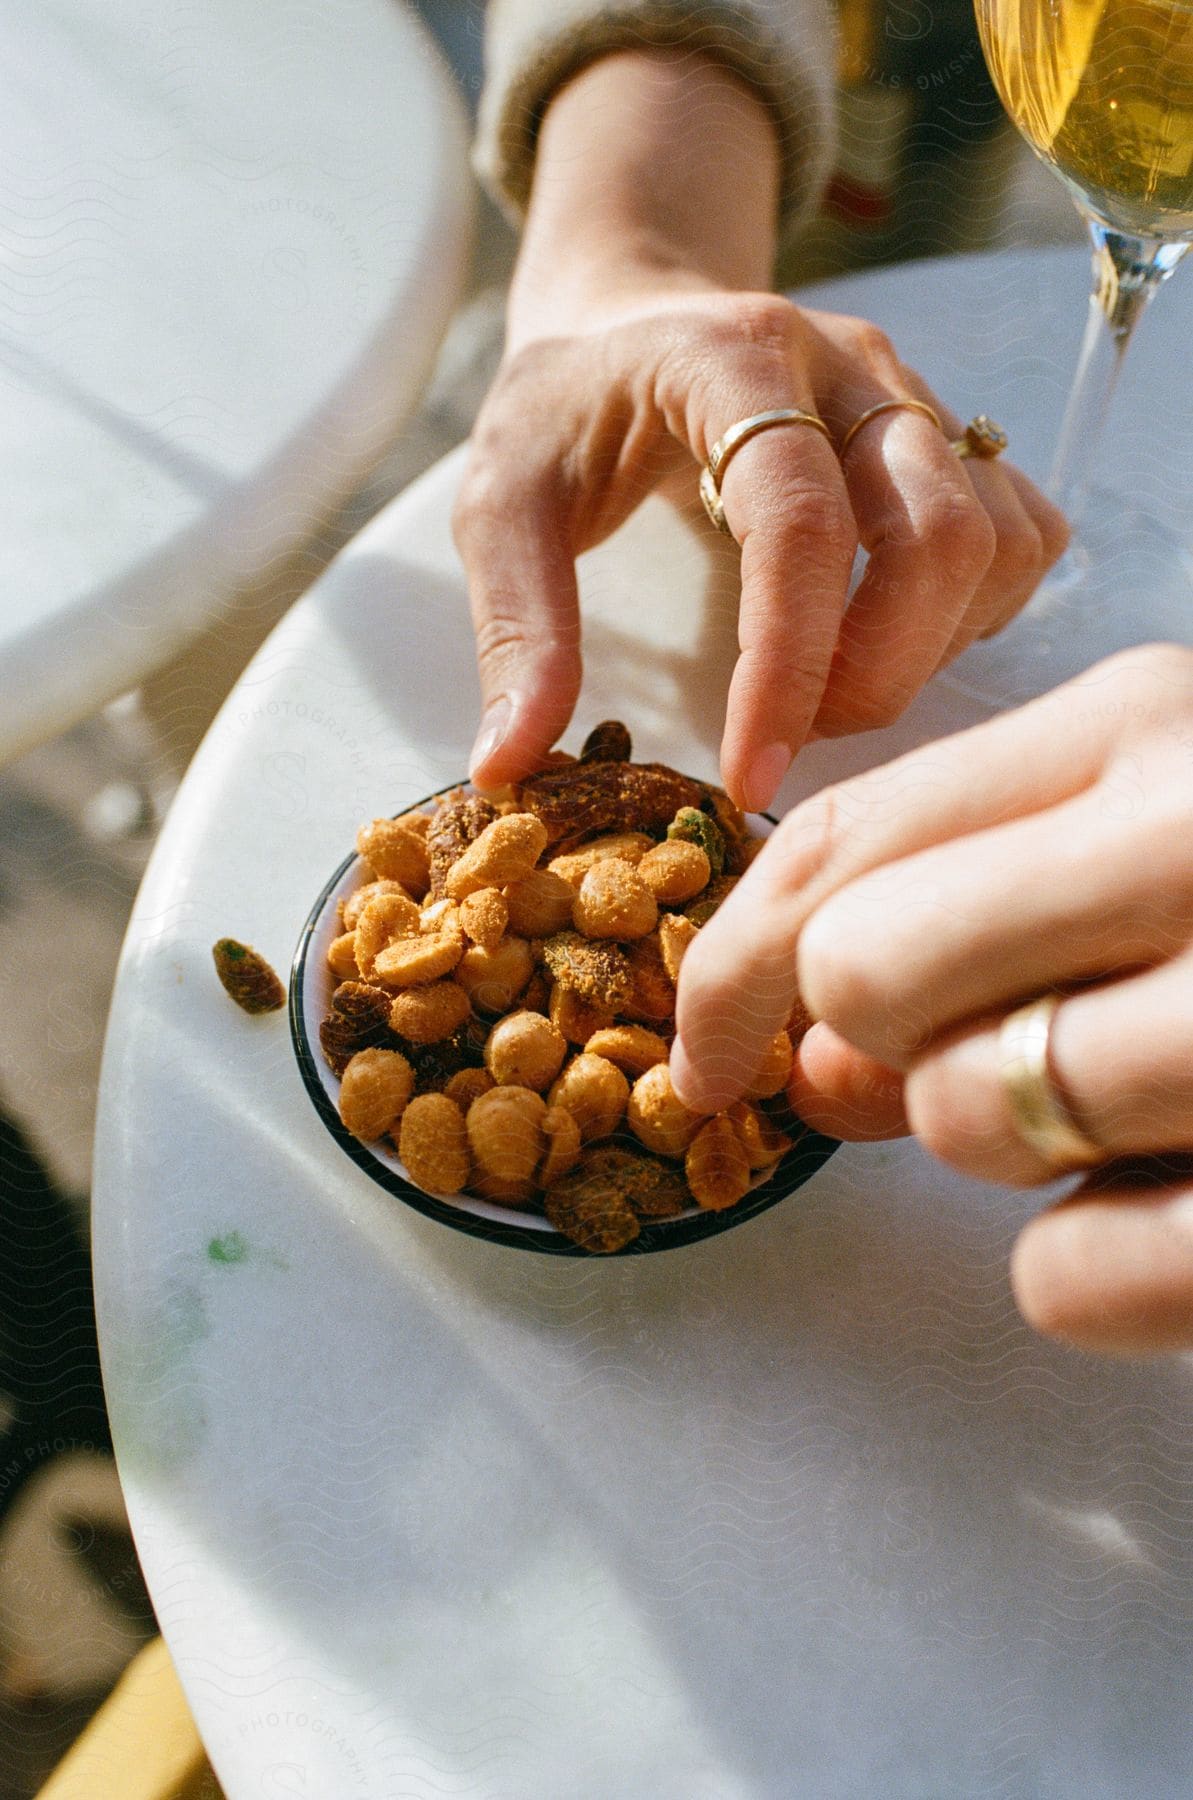 Two peoples hands reach for nuts in a small bowl with a drink on the table